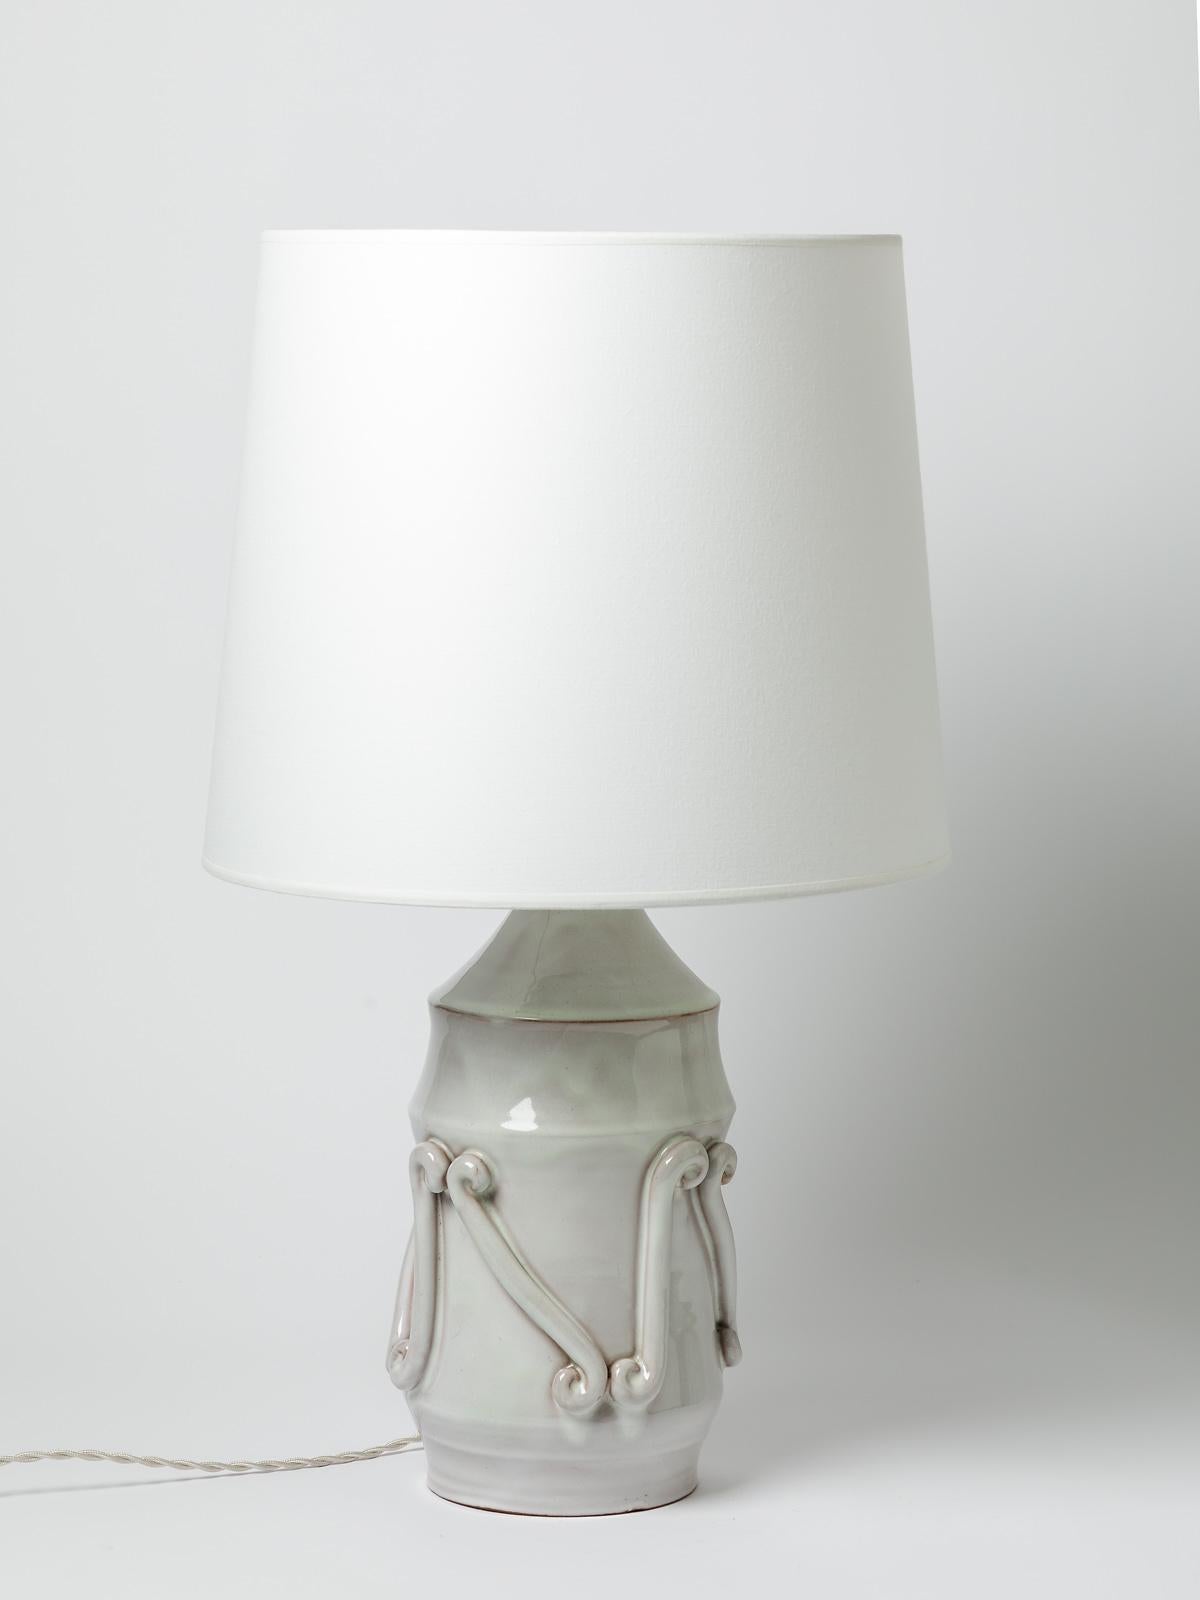 A ceramic table lamp with white glaze decoration by Jean Austry.
Sold with a new lamp shaded new european electrical system
Perfect original conditions.
Signed under the base.
Circa 1960- 1970.
Dimensions :
- Ceramic only : 30 x 16 cm / 11.8 '